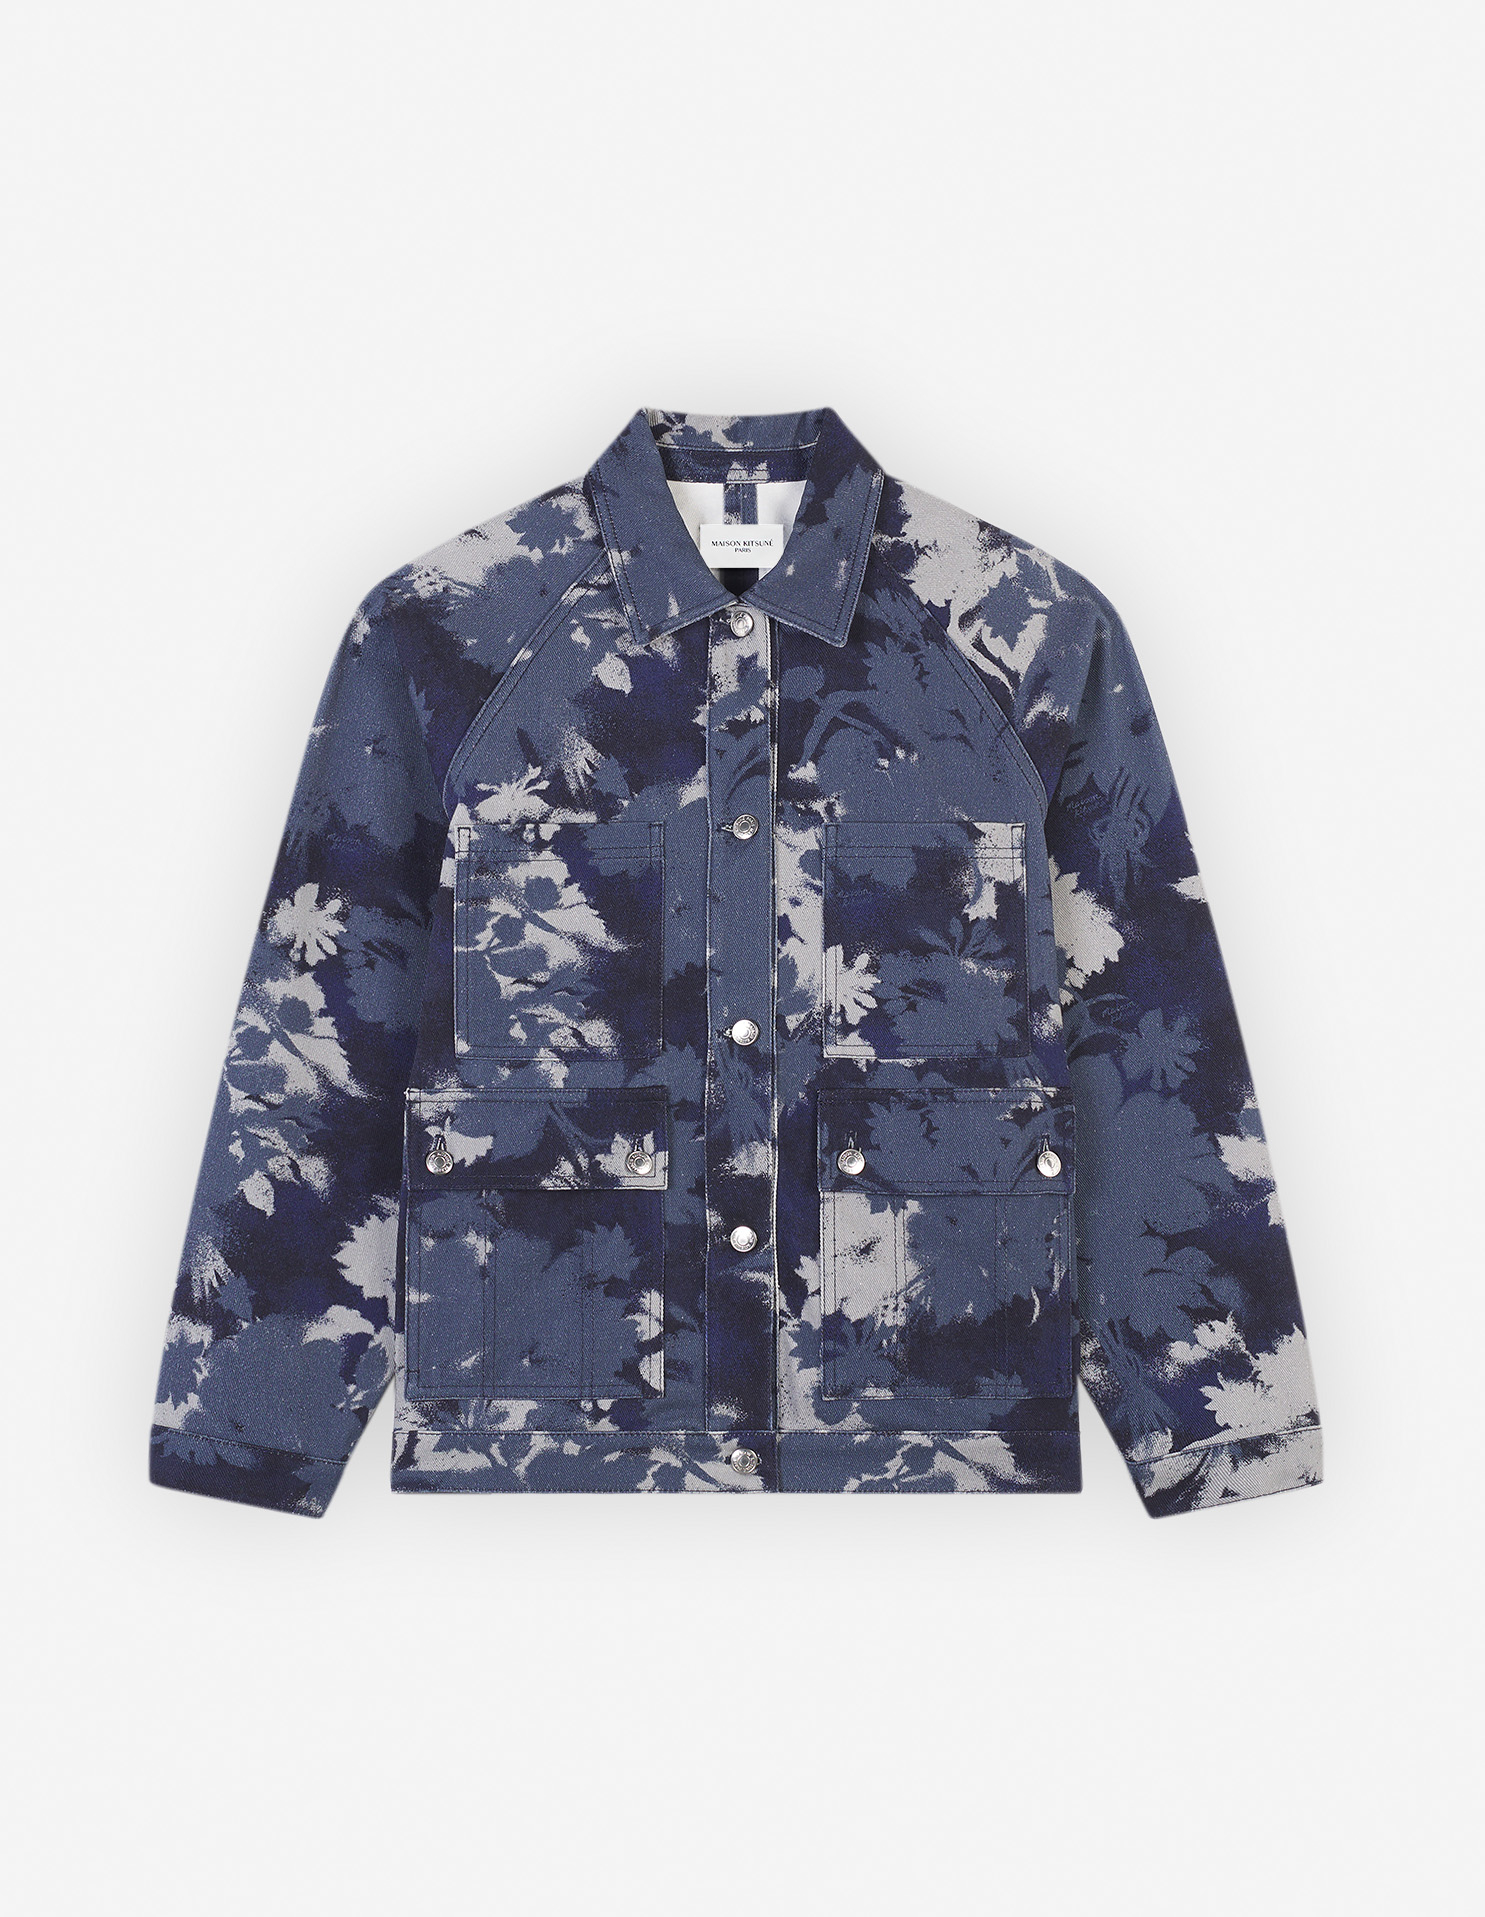 Workwear Overshirt in Bouquet Cameo Printed Cotton - Size : XL - Color : Navy/Stone Floral Cameo - for Men - Maison Kitsuné